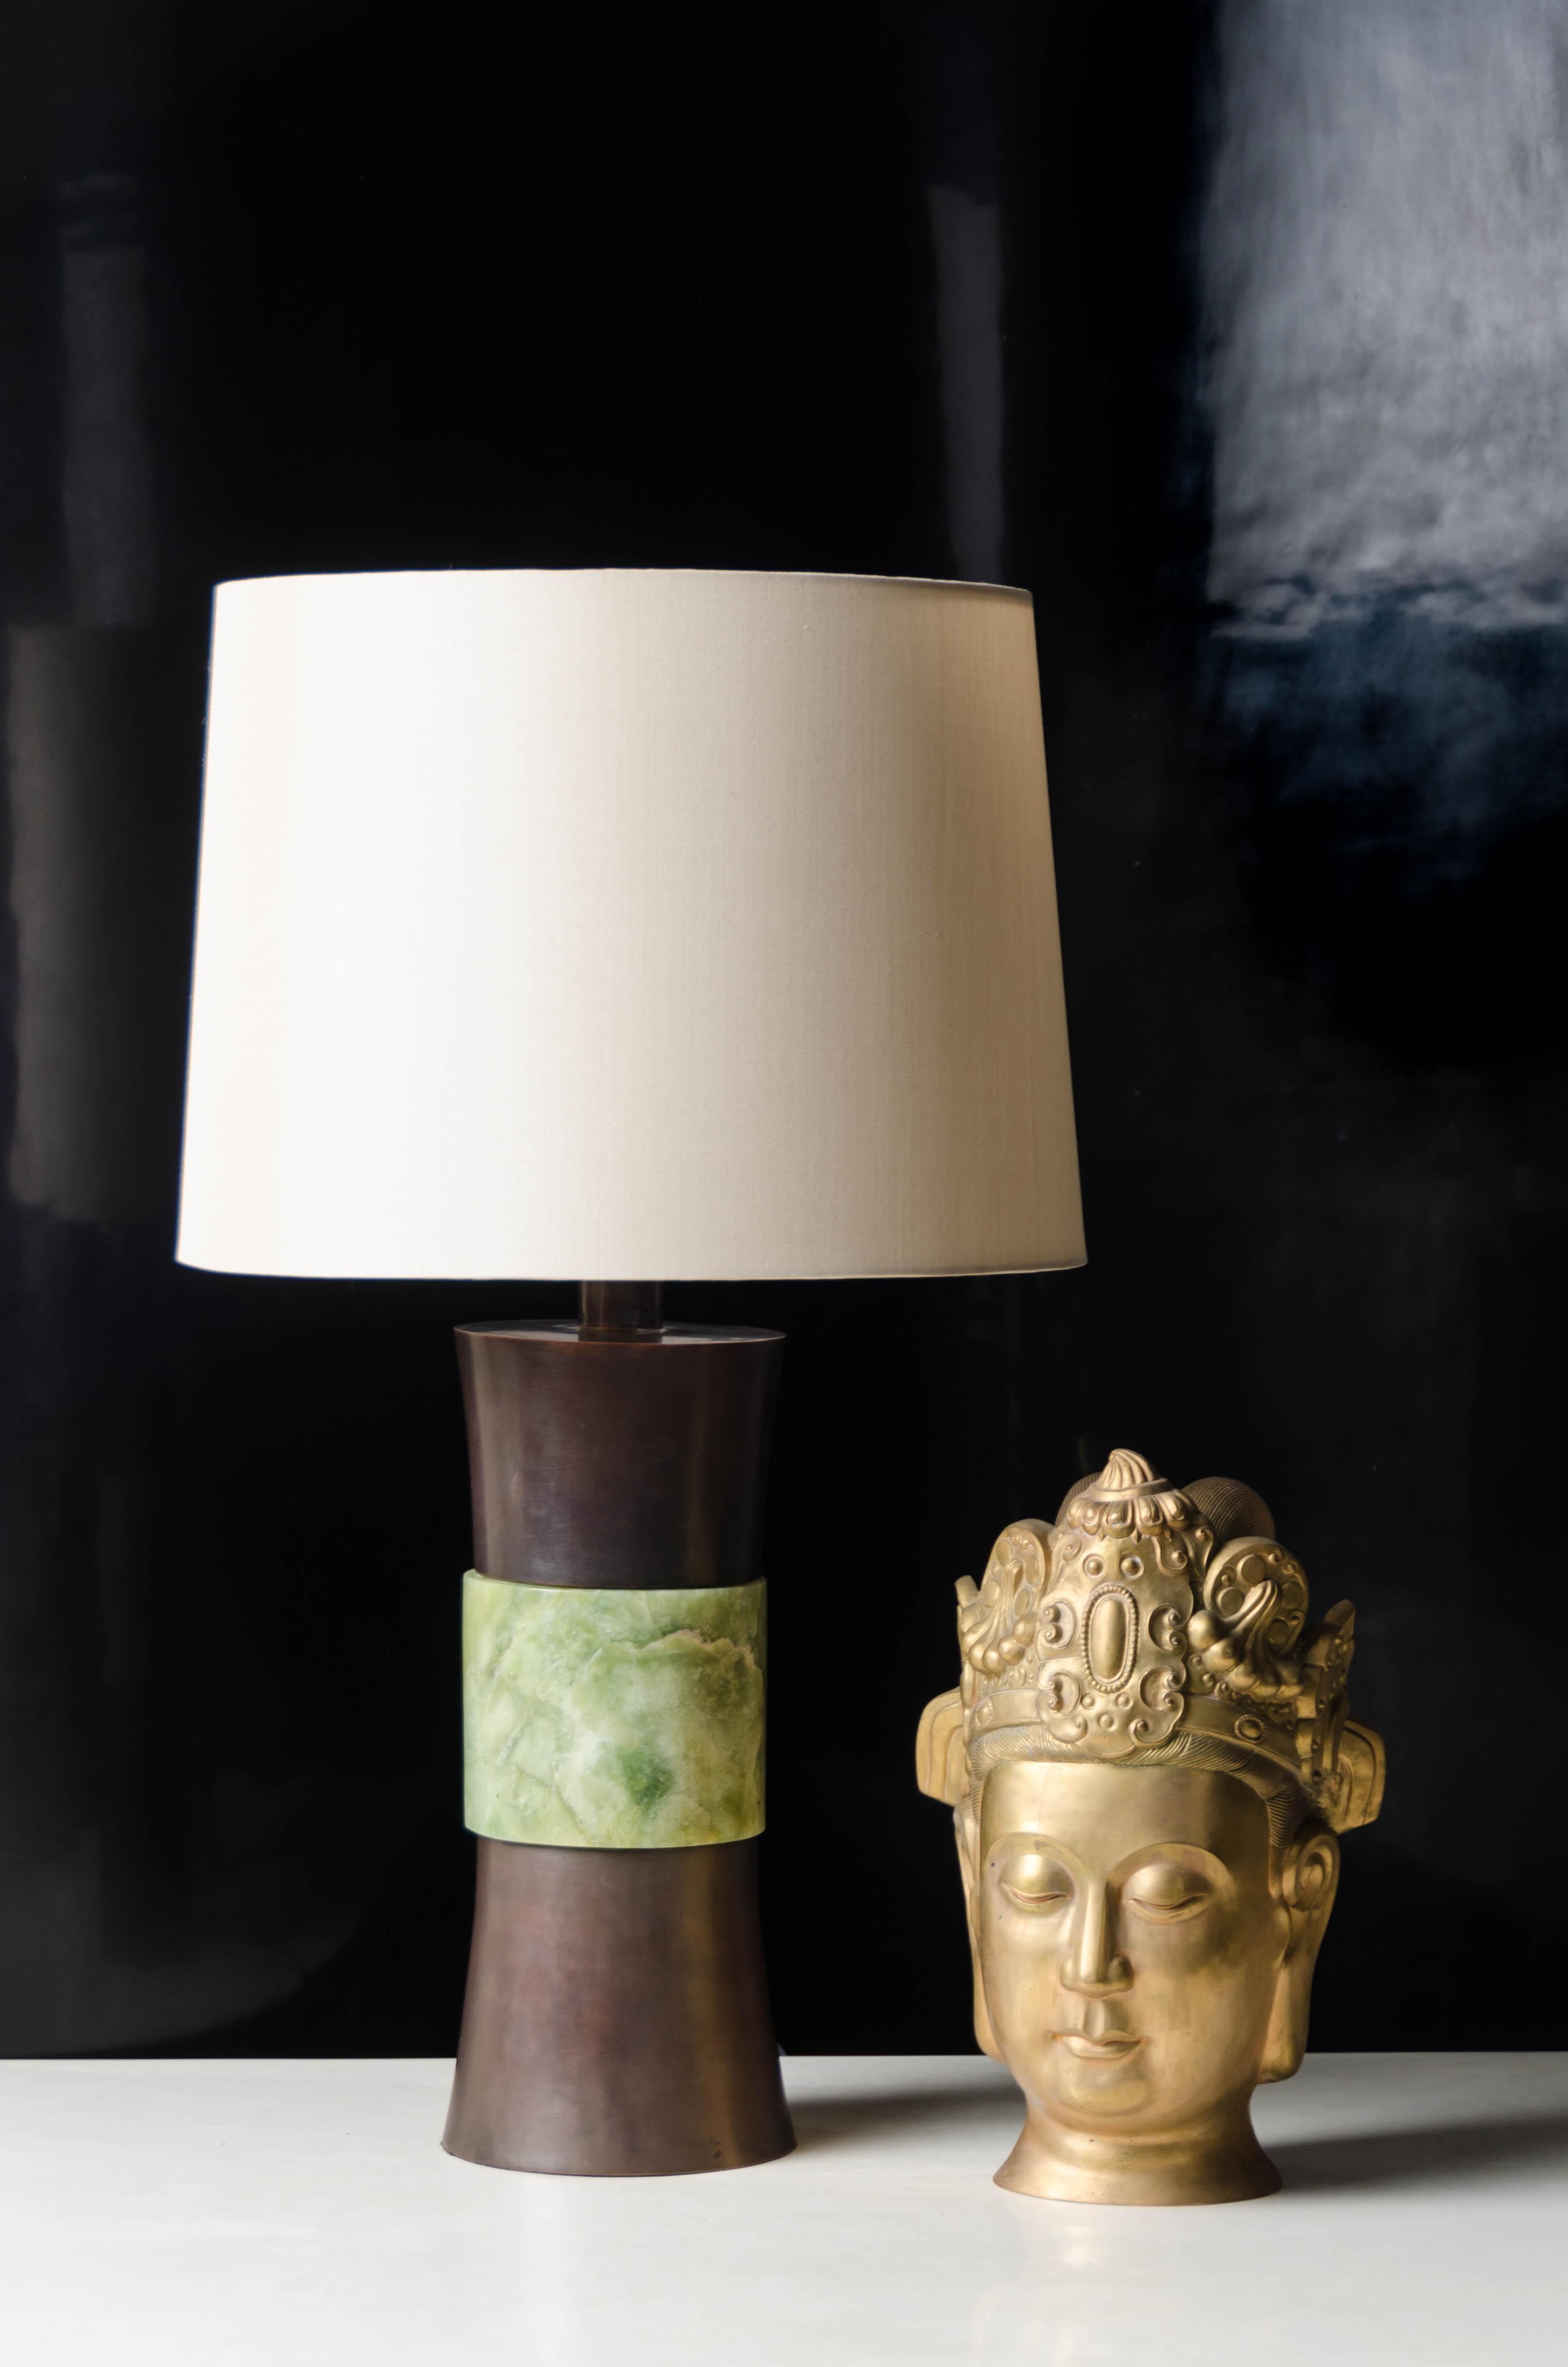 Contemporary Gu Copper Lamp W/ Nephrite Jade by Robert Kuo, Hand Carved, Repousse, Limited For Sale